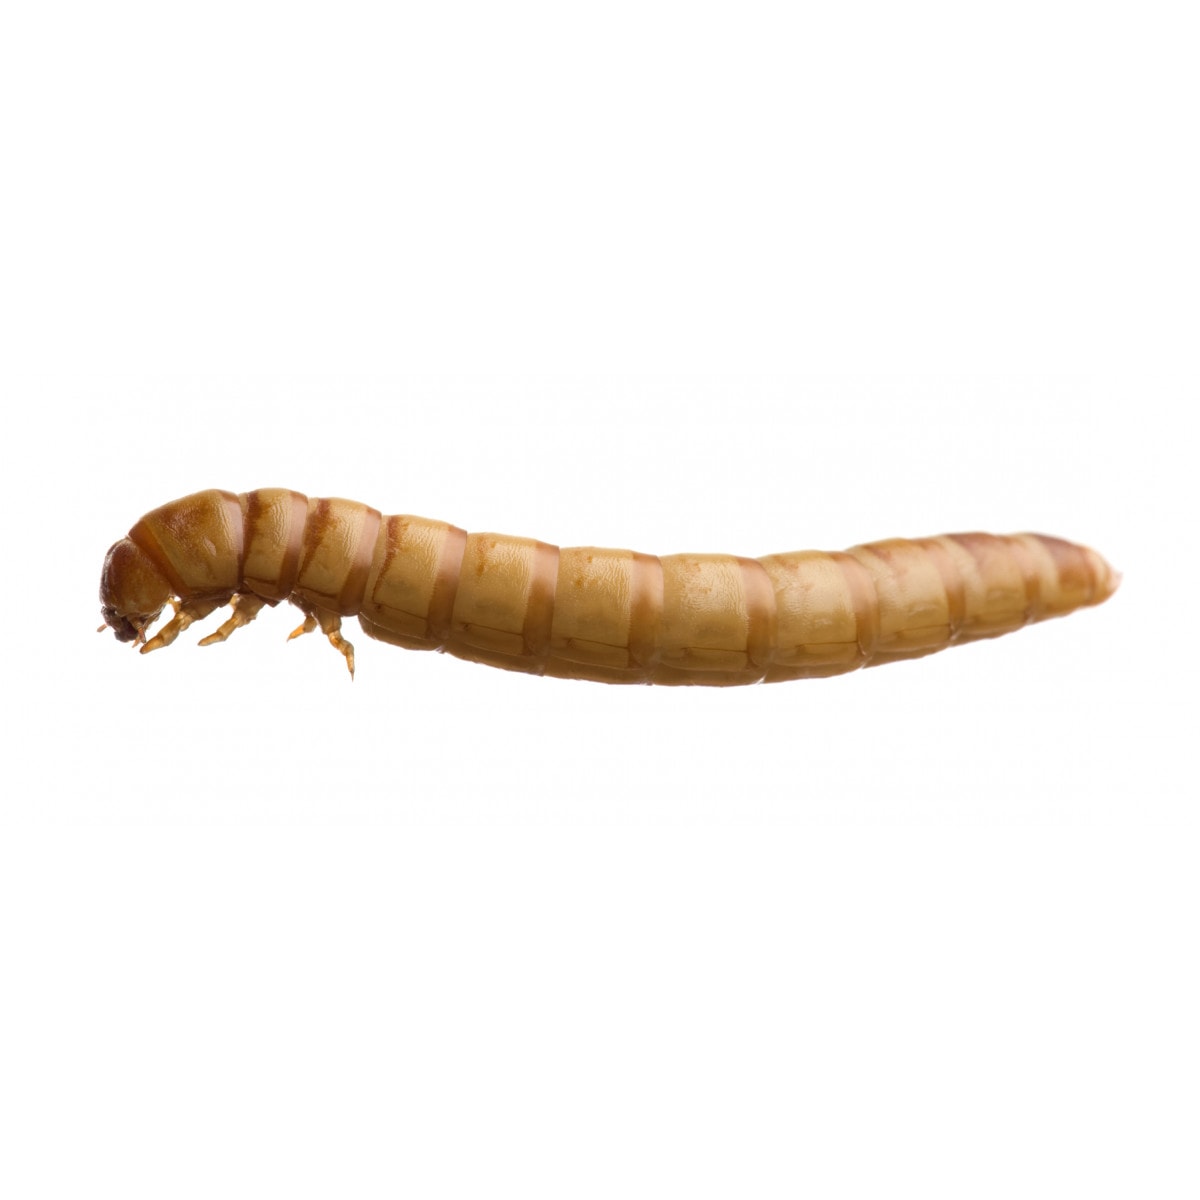 meal worm